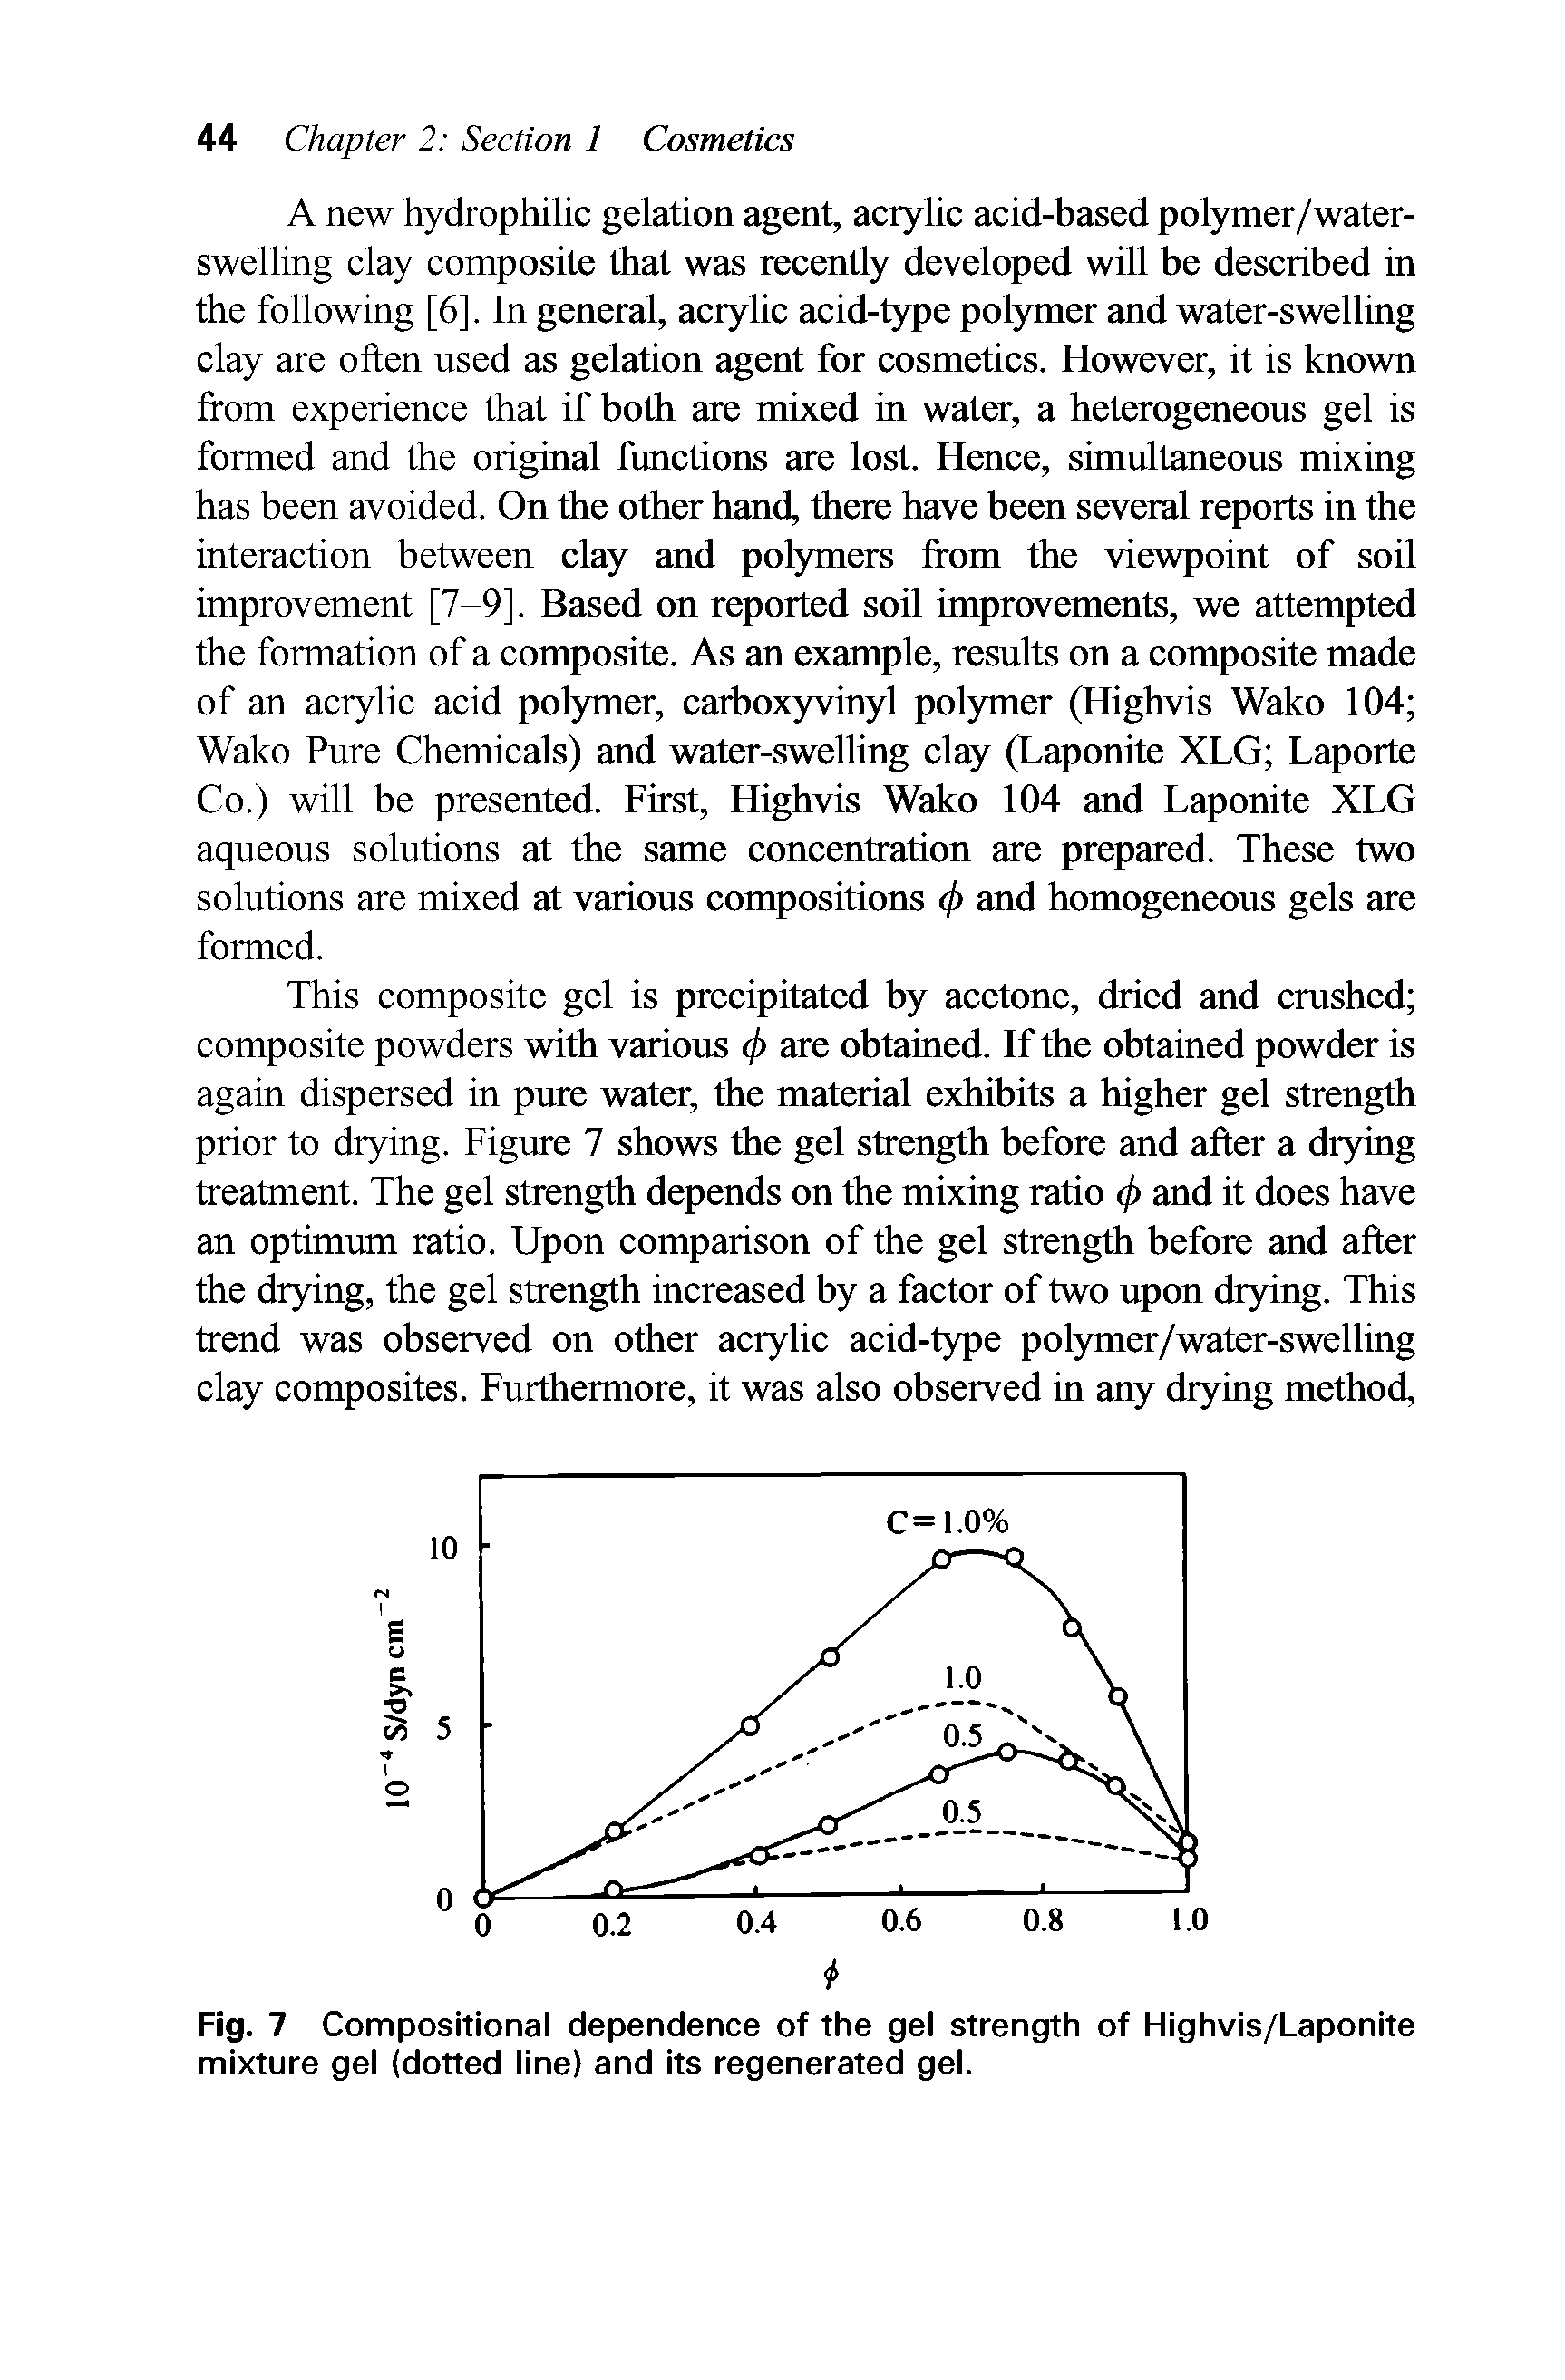 Fig. 7 Compositional dependence of the gel strength of Highvis/Laponite mixture gel (dotted line) and its regenerated gel.